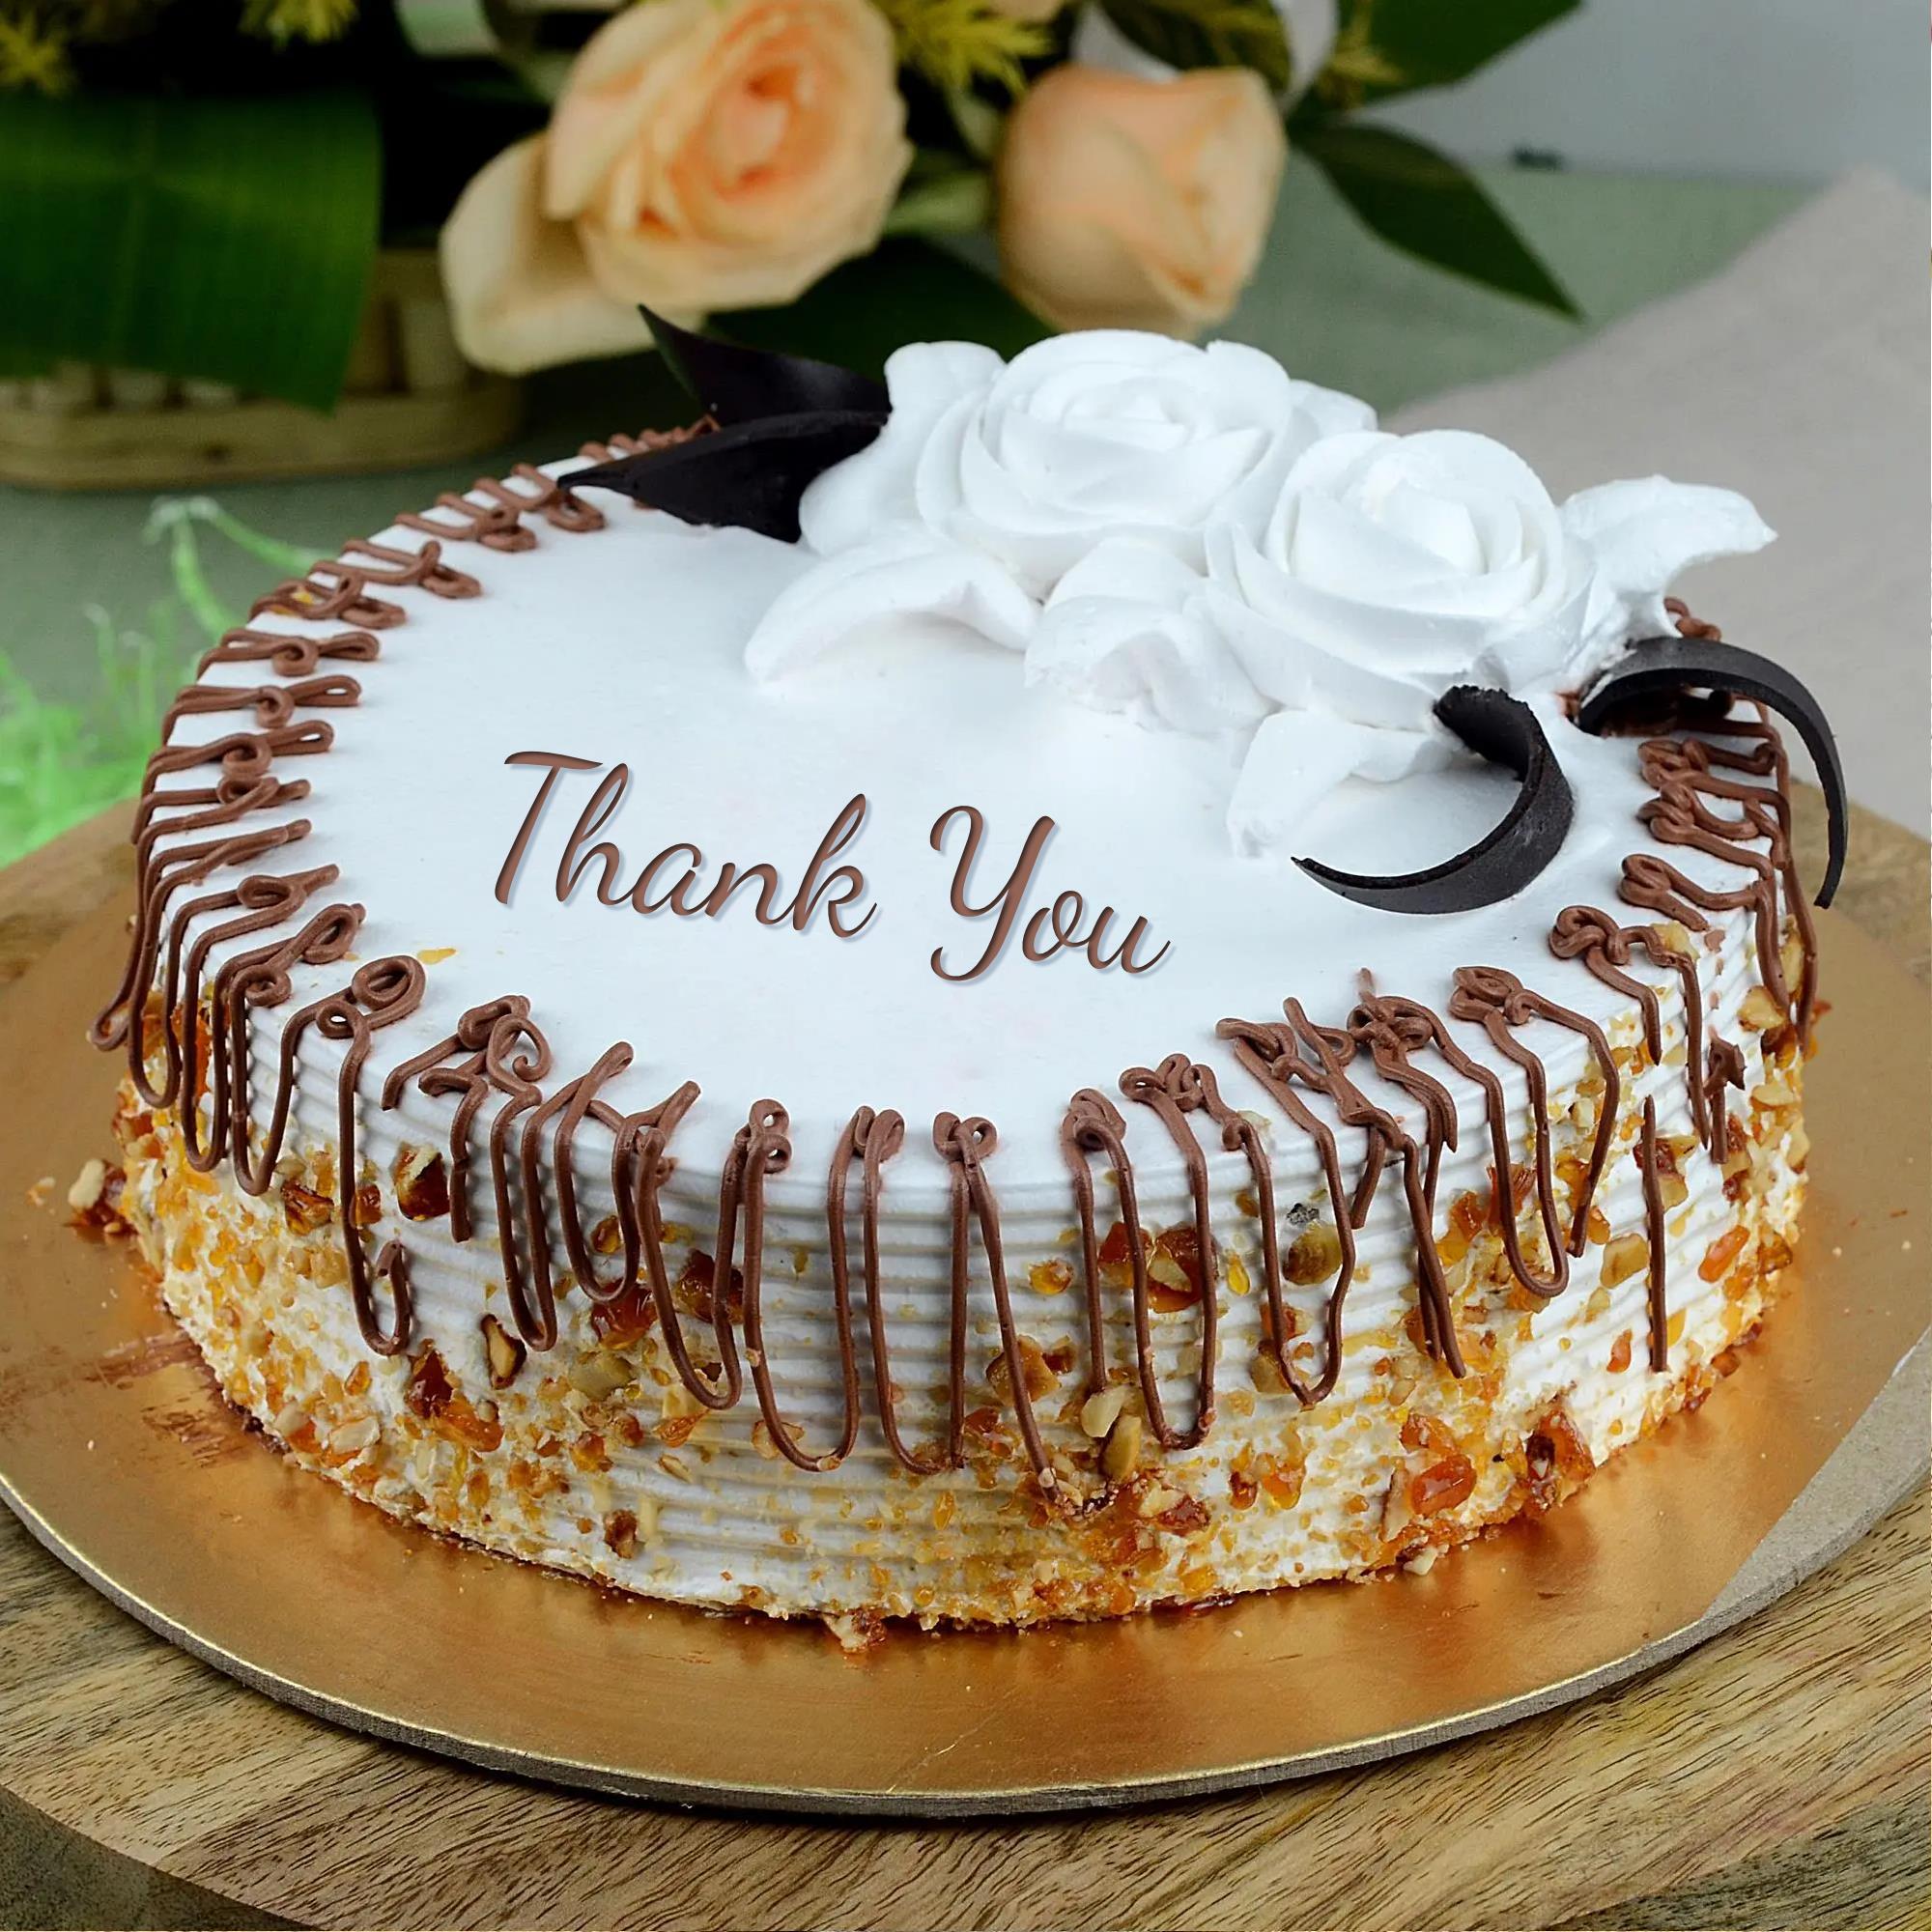 A Special Thank You Cake | Bettycake's Photo's and More